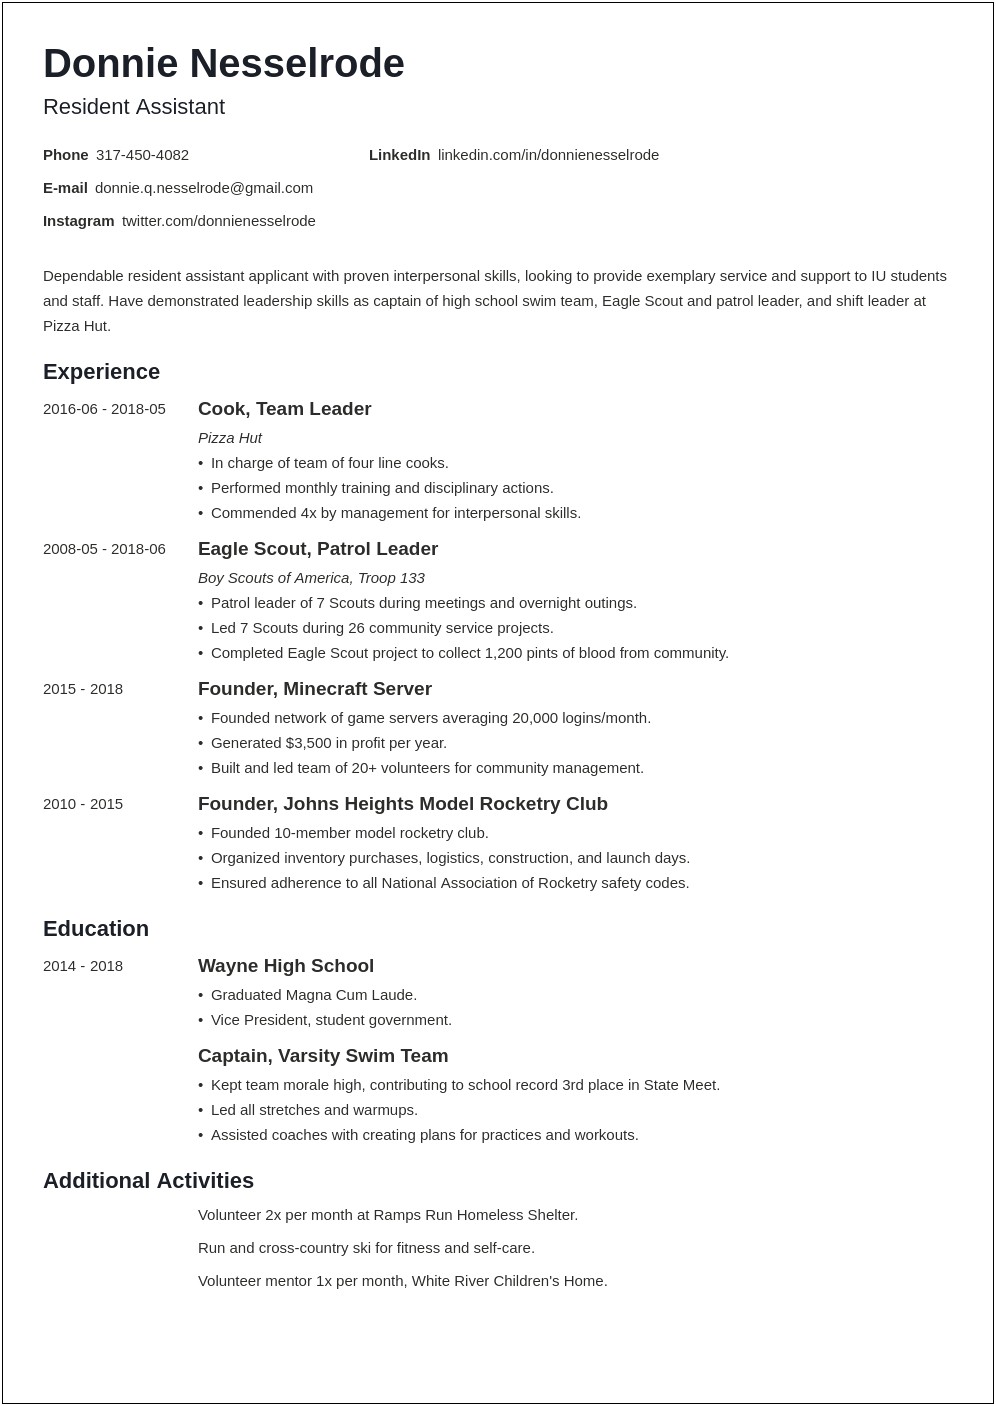 Resident Service Assistant Job Duties For Resume